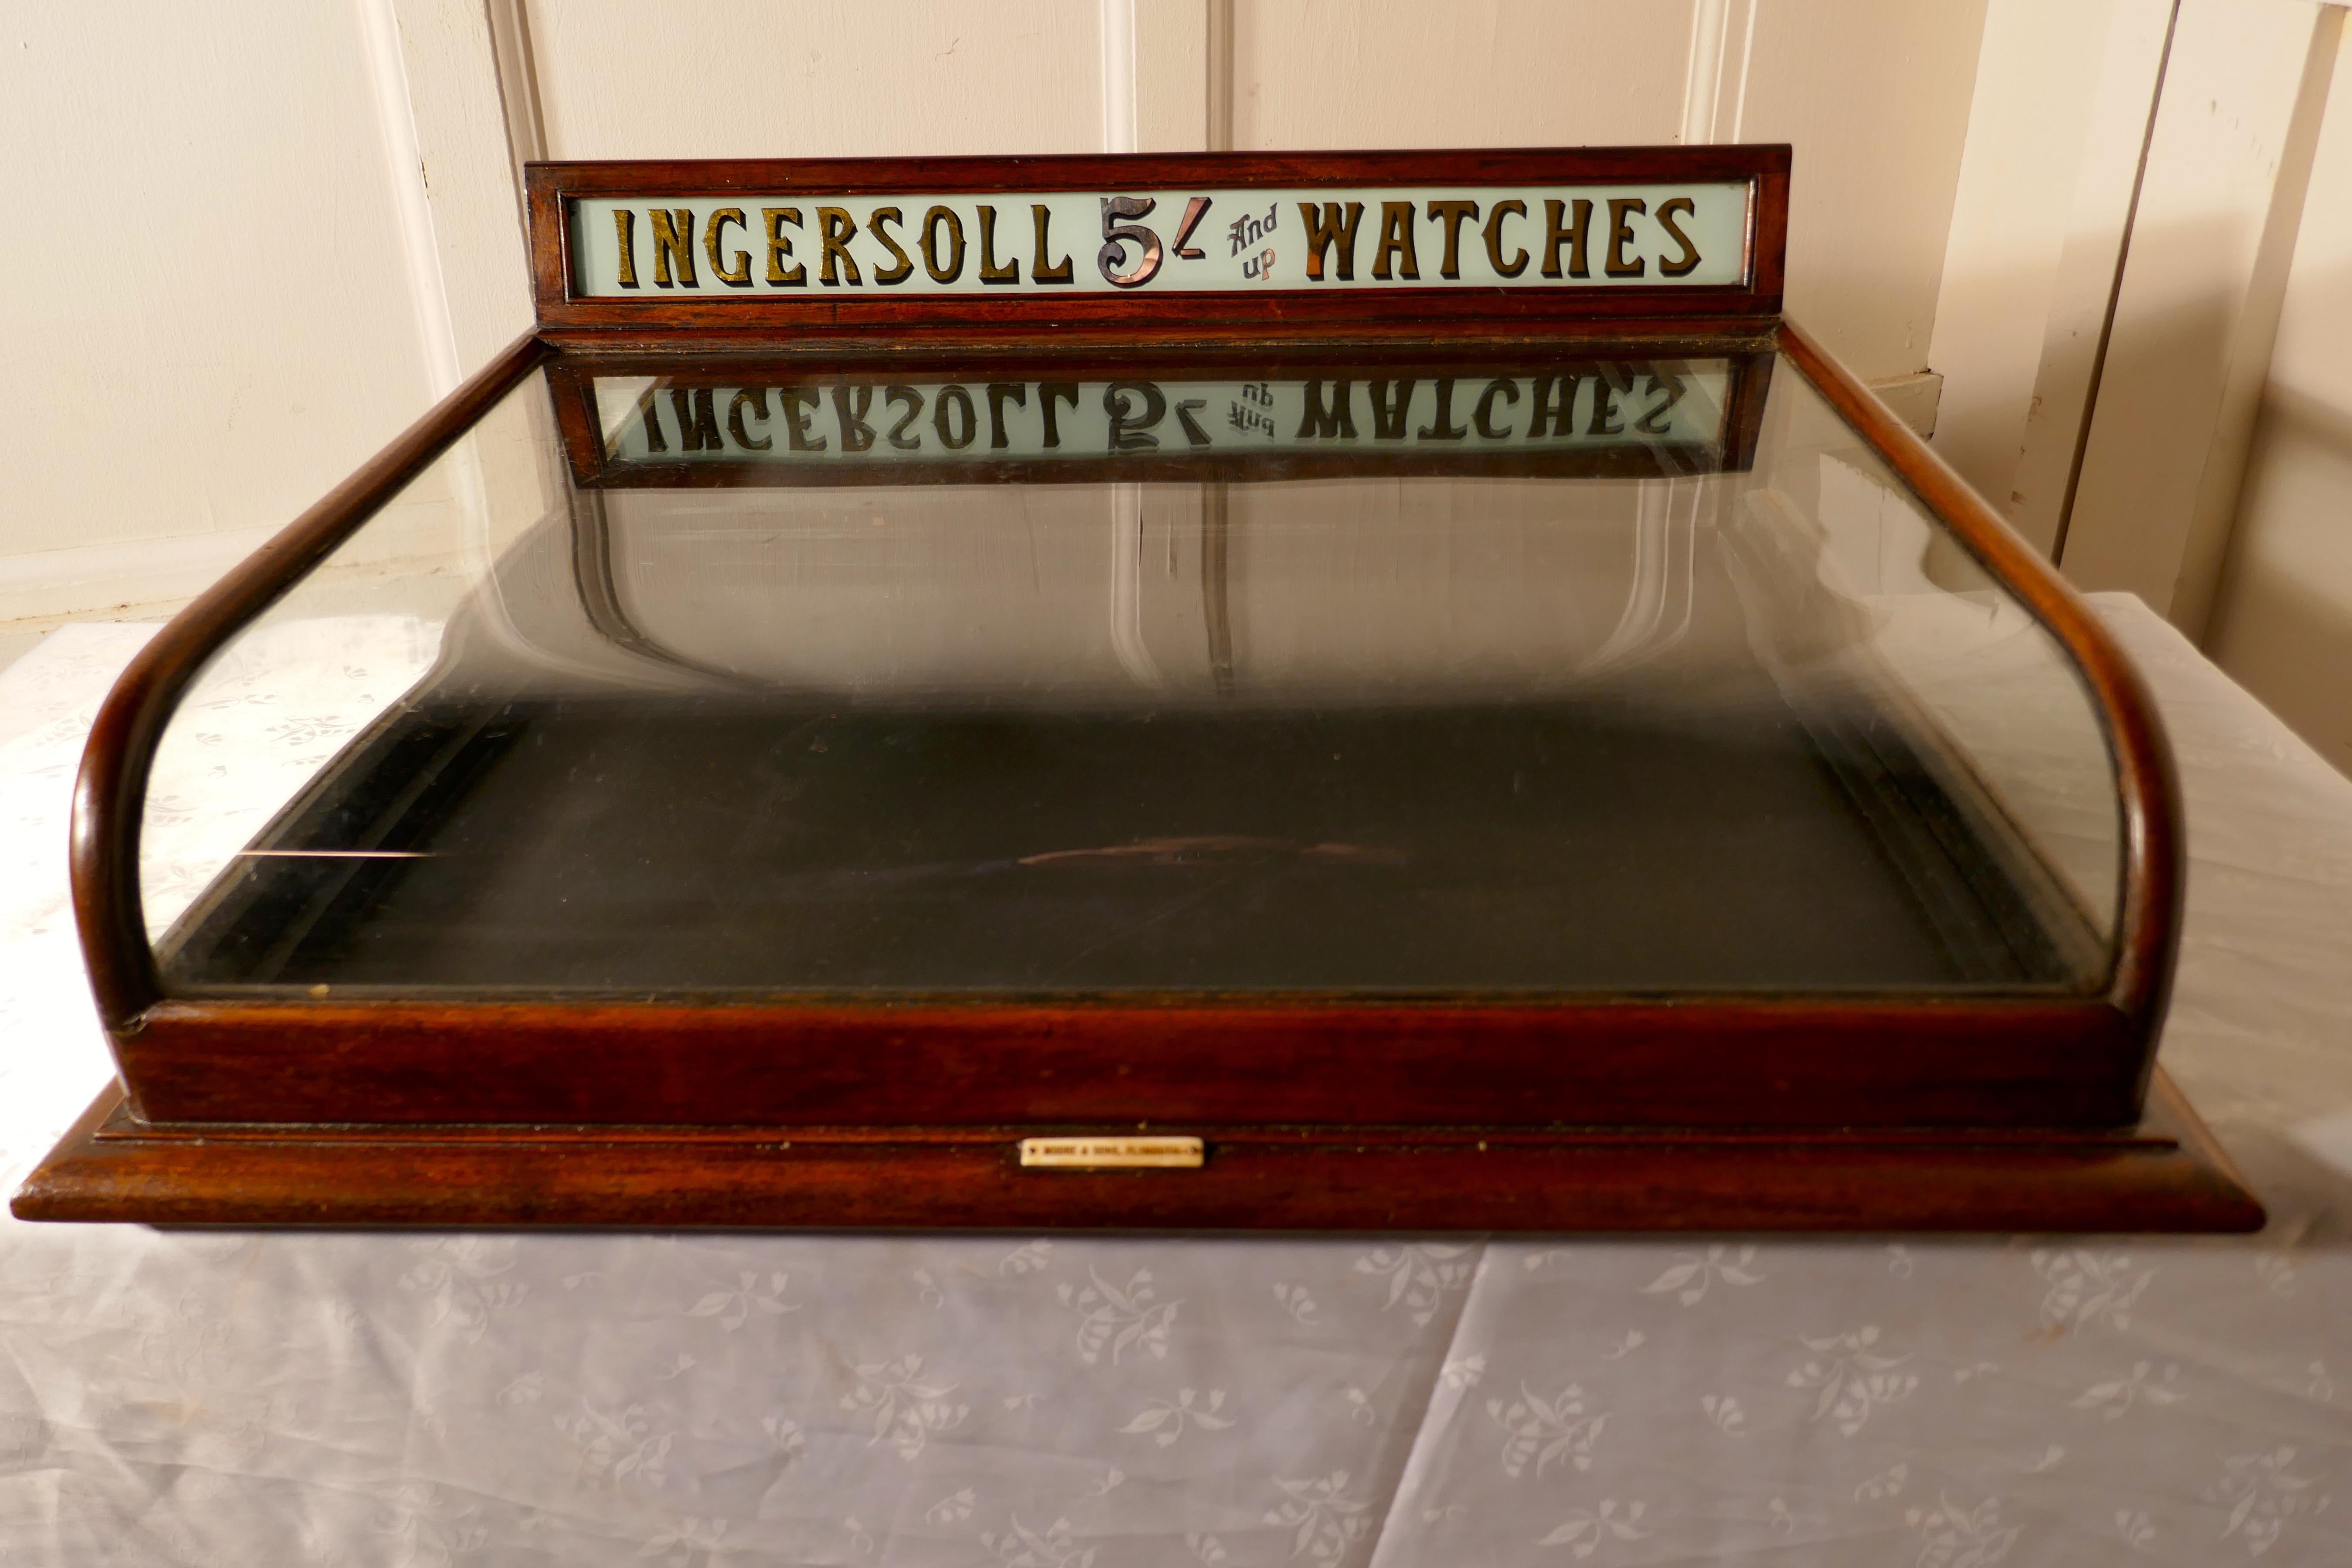 Ingersoll Jewelers shop watch shop display cabinet

This is a very very good piece, it has at the back the Ingersoll advertising sign, this is in Gold shadowed writing on Milk Glass announcing “INGERSOLL 5/- AND UP WATCHES “
The cabinet is a